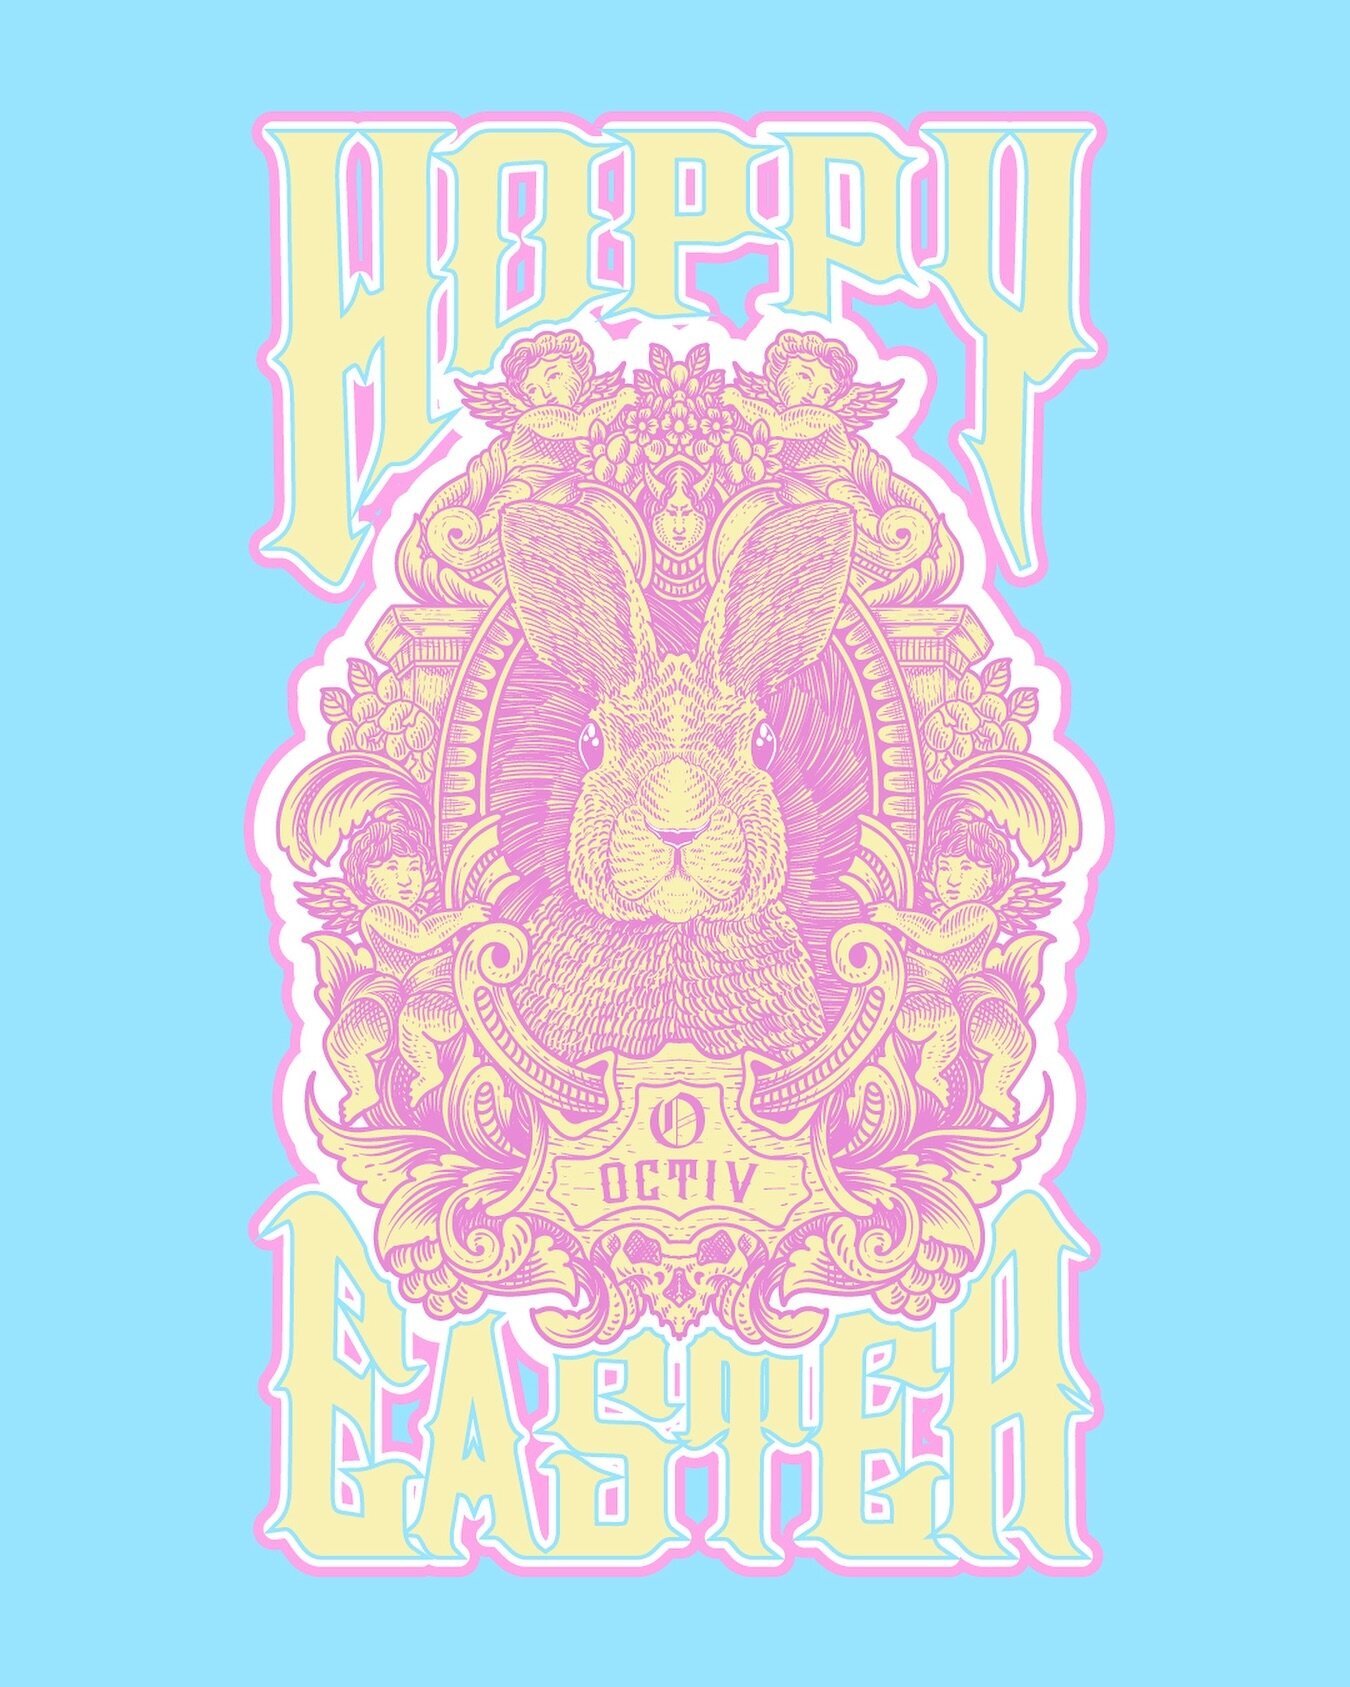 Hoppy Easter from our fam to yours! 🐇🪺 Hope y&rsquo;all had a great day off and got to kick it with your loved ones 🙏🏽
&bull;
#easter #happyeaster #graphicdesign #graphicdesigner #adobeillustrator